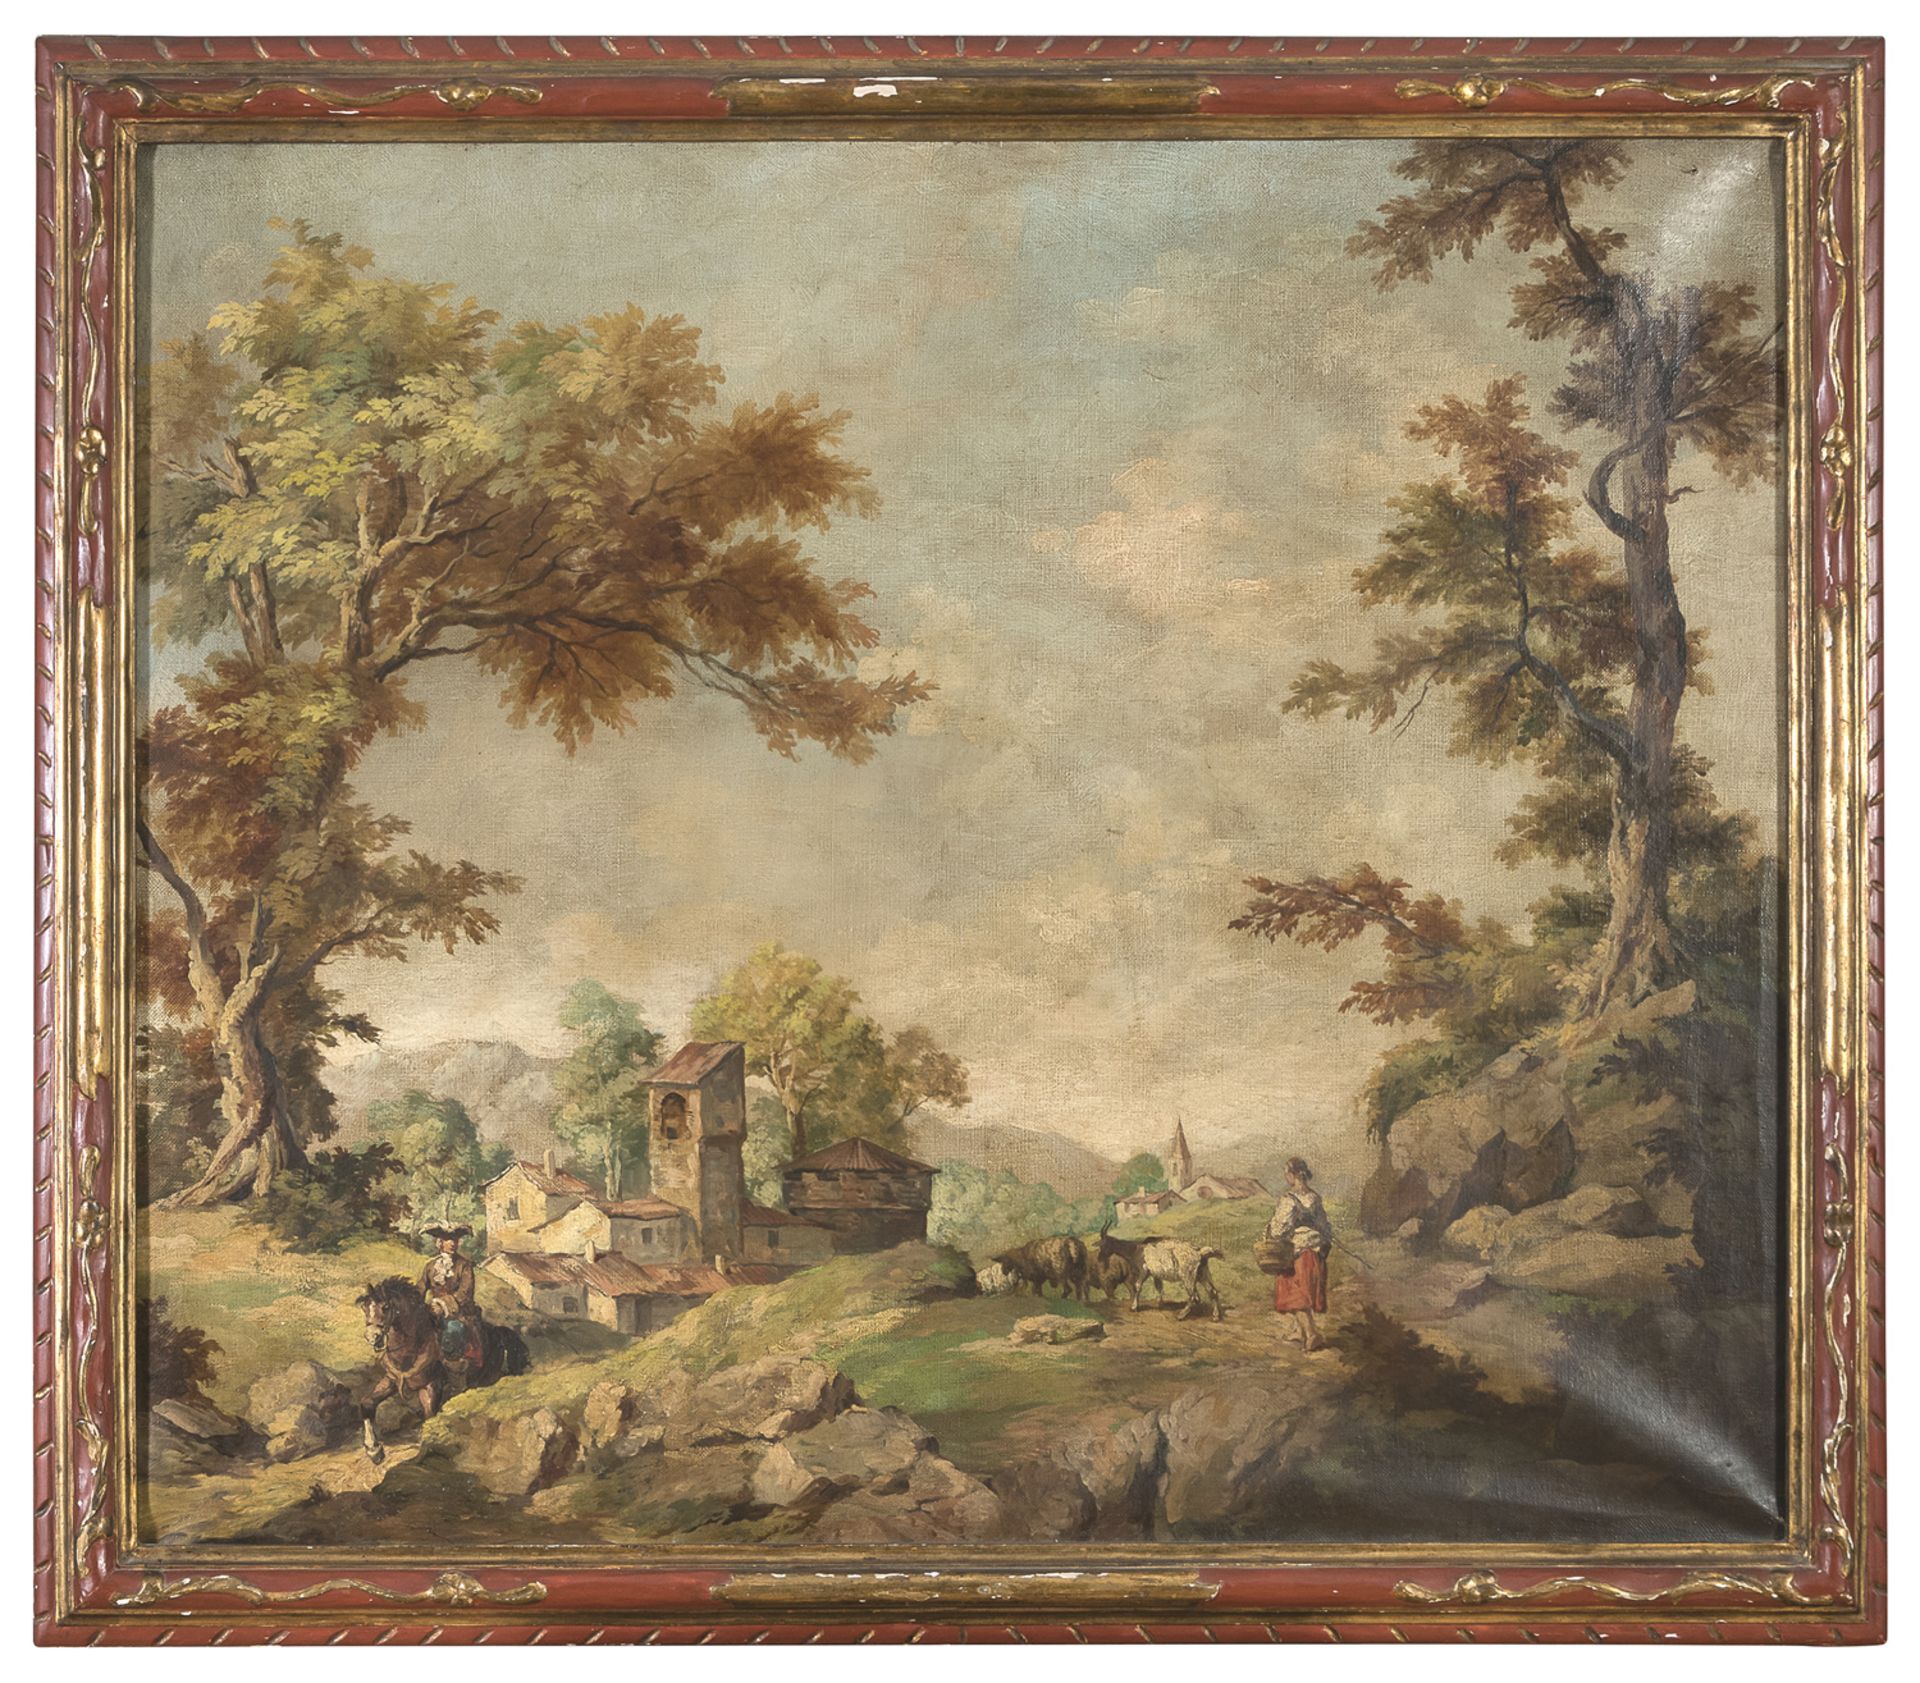 OIL PAINTING OF LANDSCAPE IN THE MANNER OF FRANCESCO ZUCCARELLI